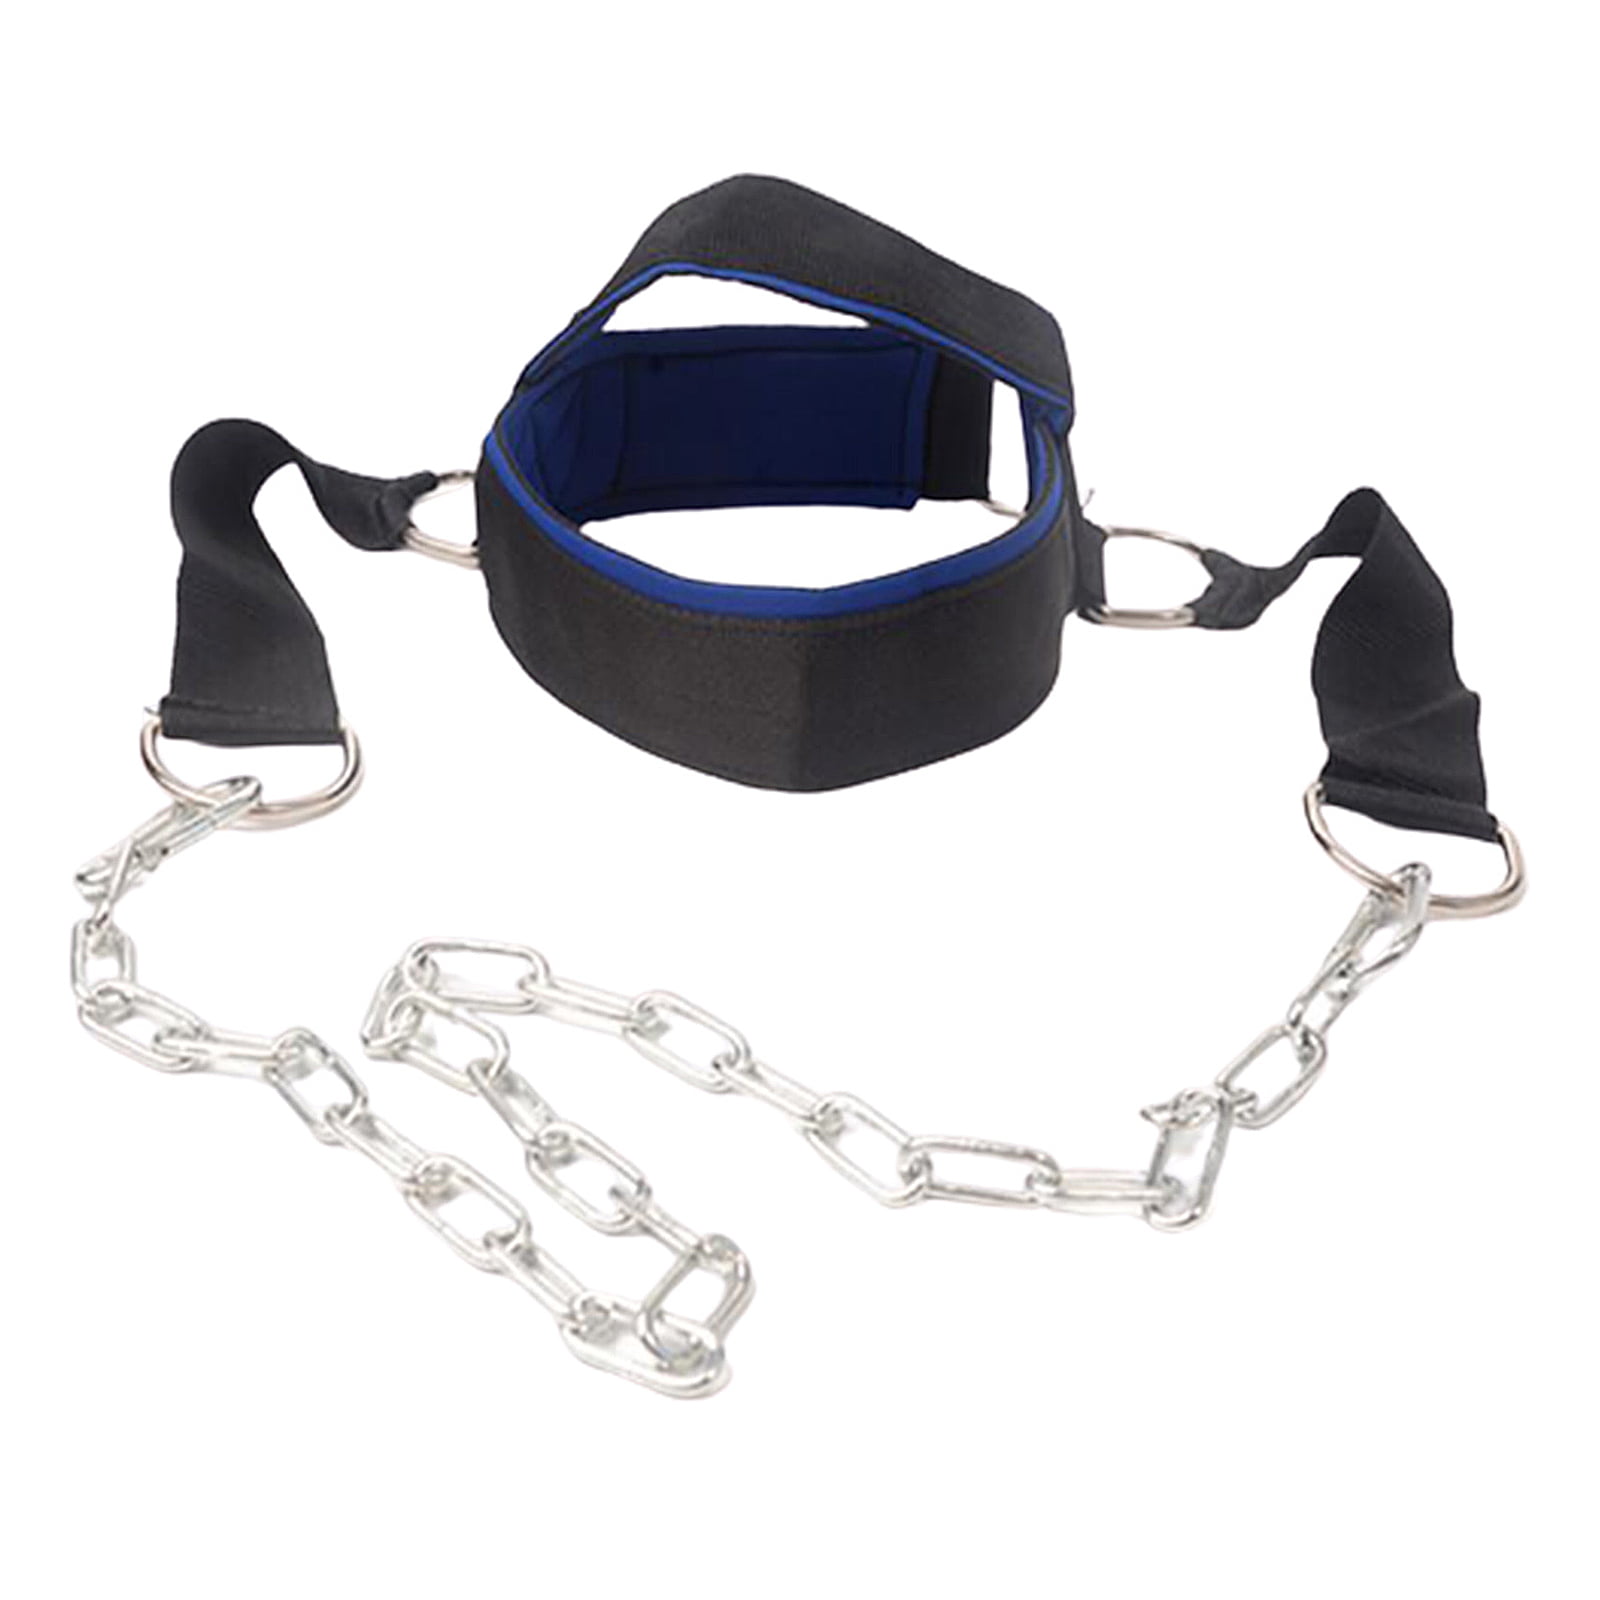 Neck Strong Muscles Belt Gym Training Weight Lifting Dip Chain Head Harness 